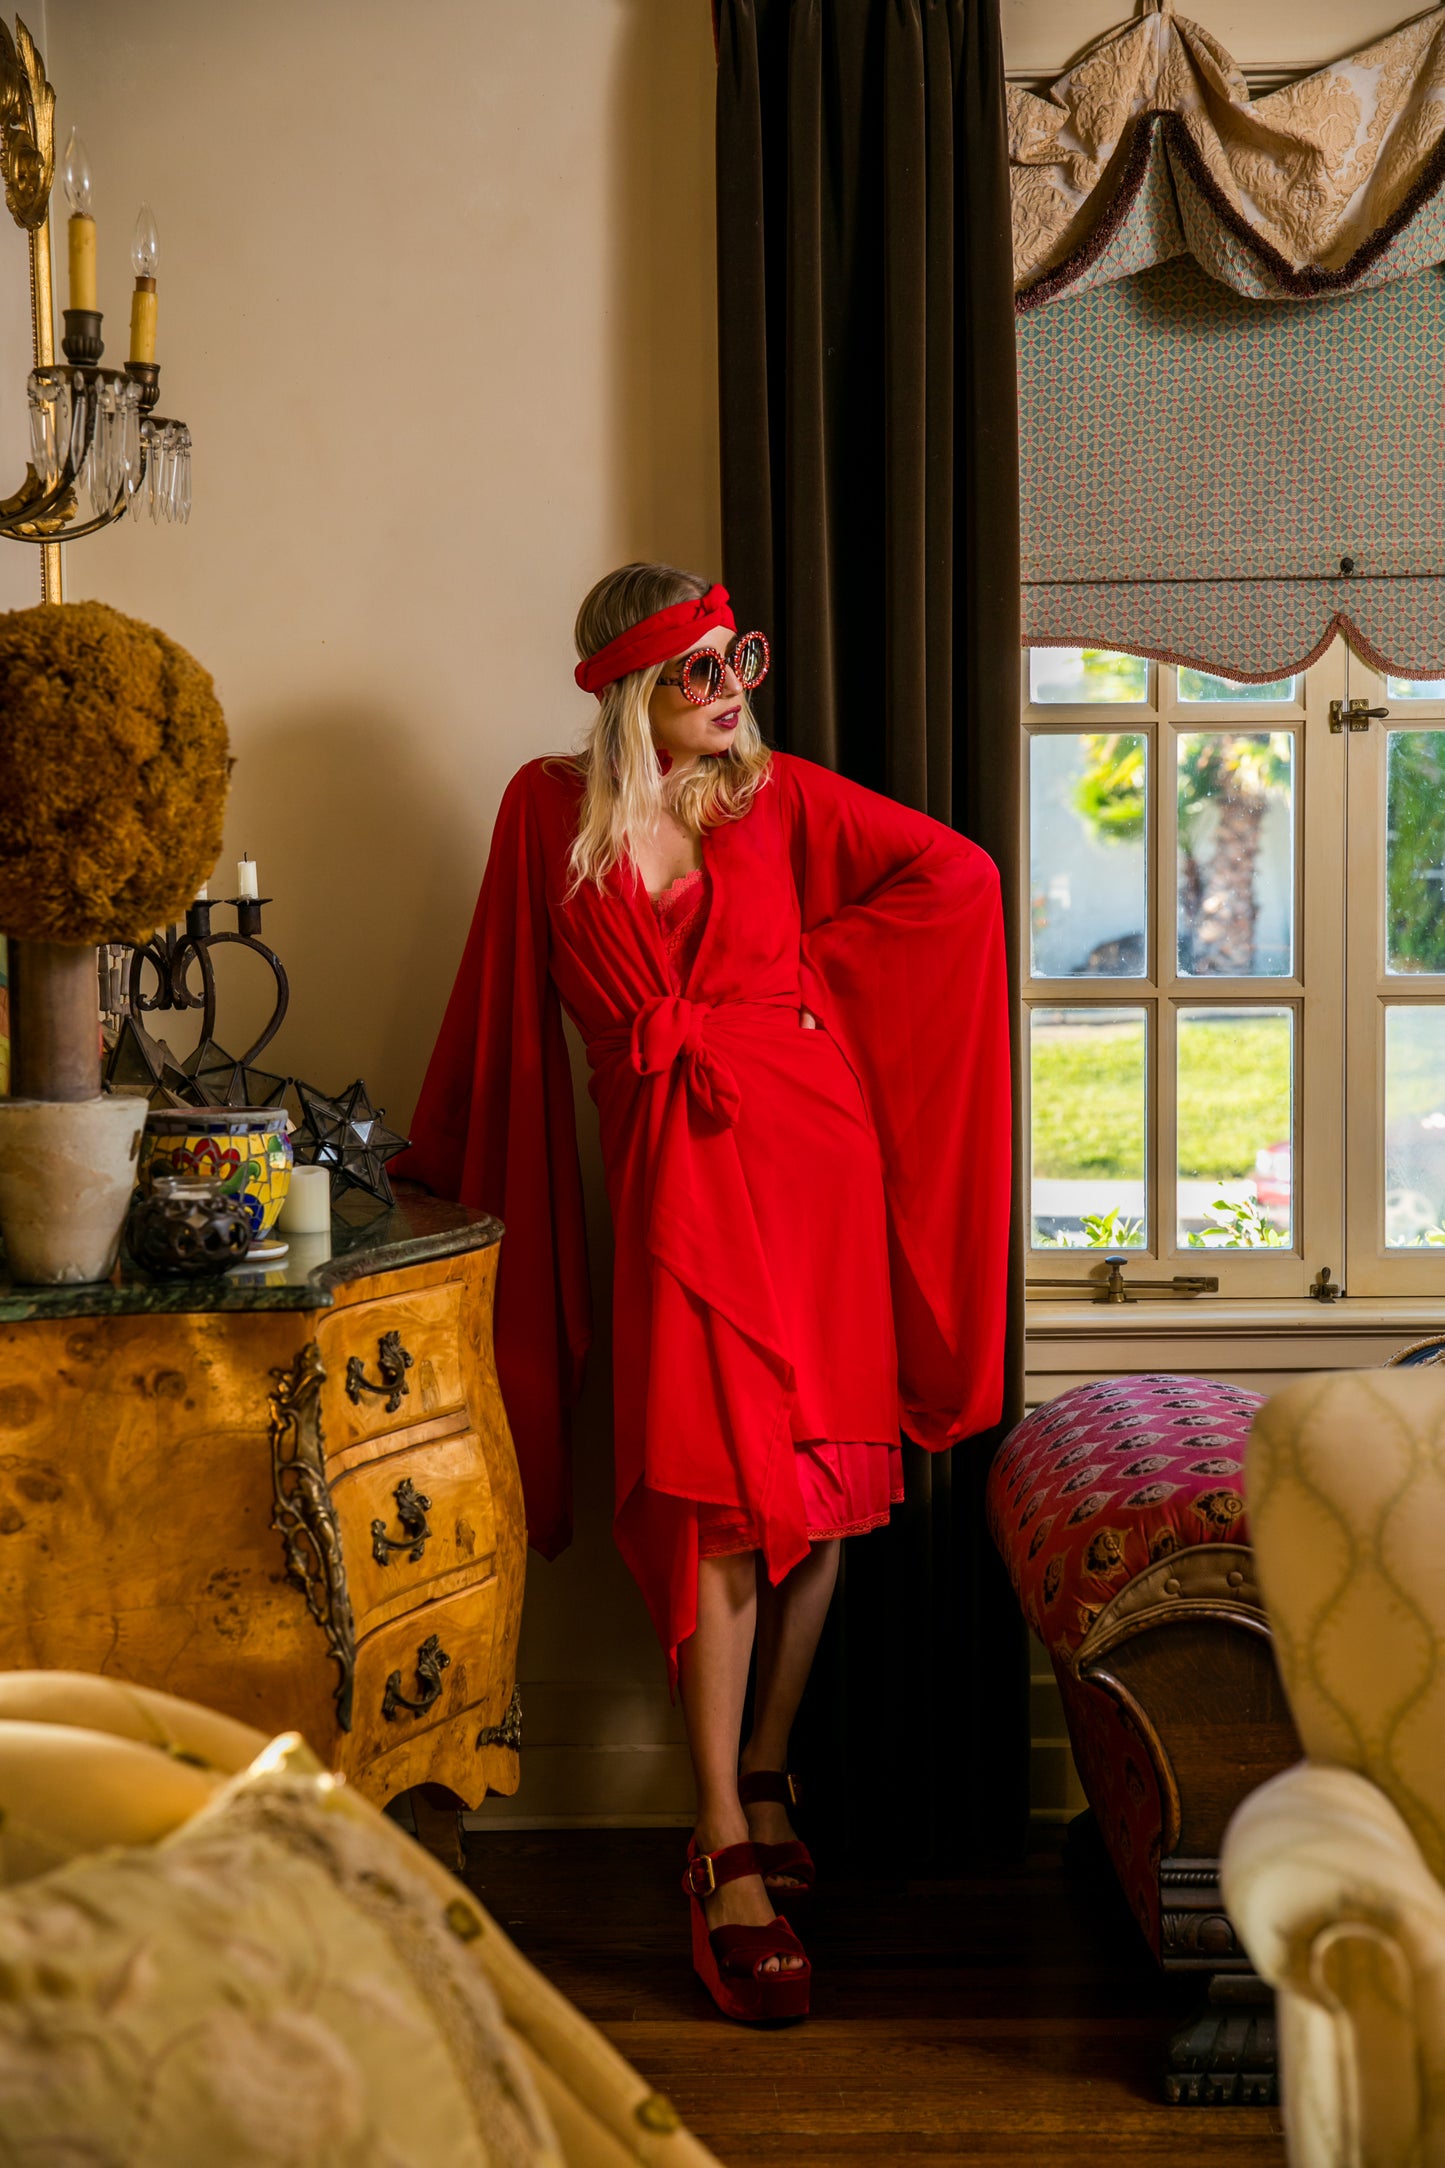 jennafer grace Truly Yours kimono scarlet crimson blood red cherry red gothic pinup vintage inspired coverup wrap dress with pockets duster jacket robe goth boho pinup bohemian hippie whimsical romantic beach poolside resort cabana lounge wear unisex handmade in California USA